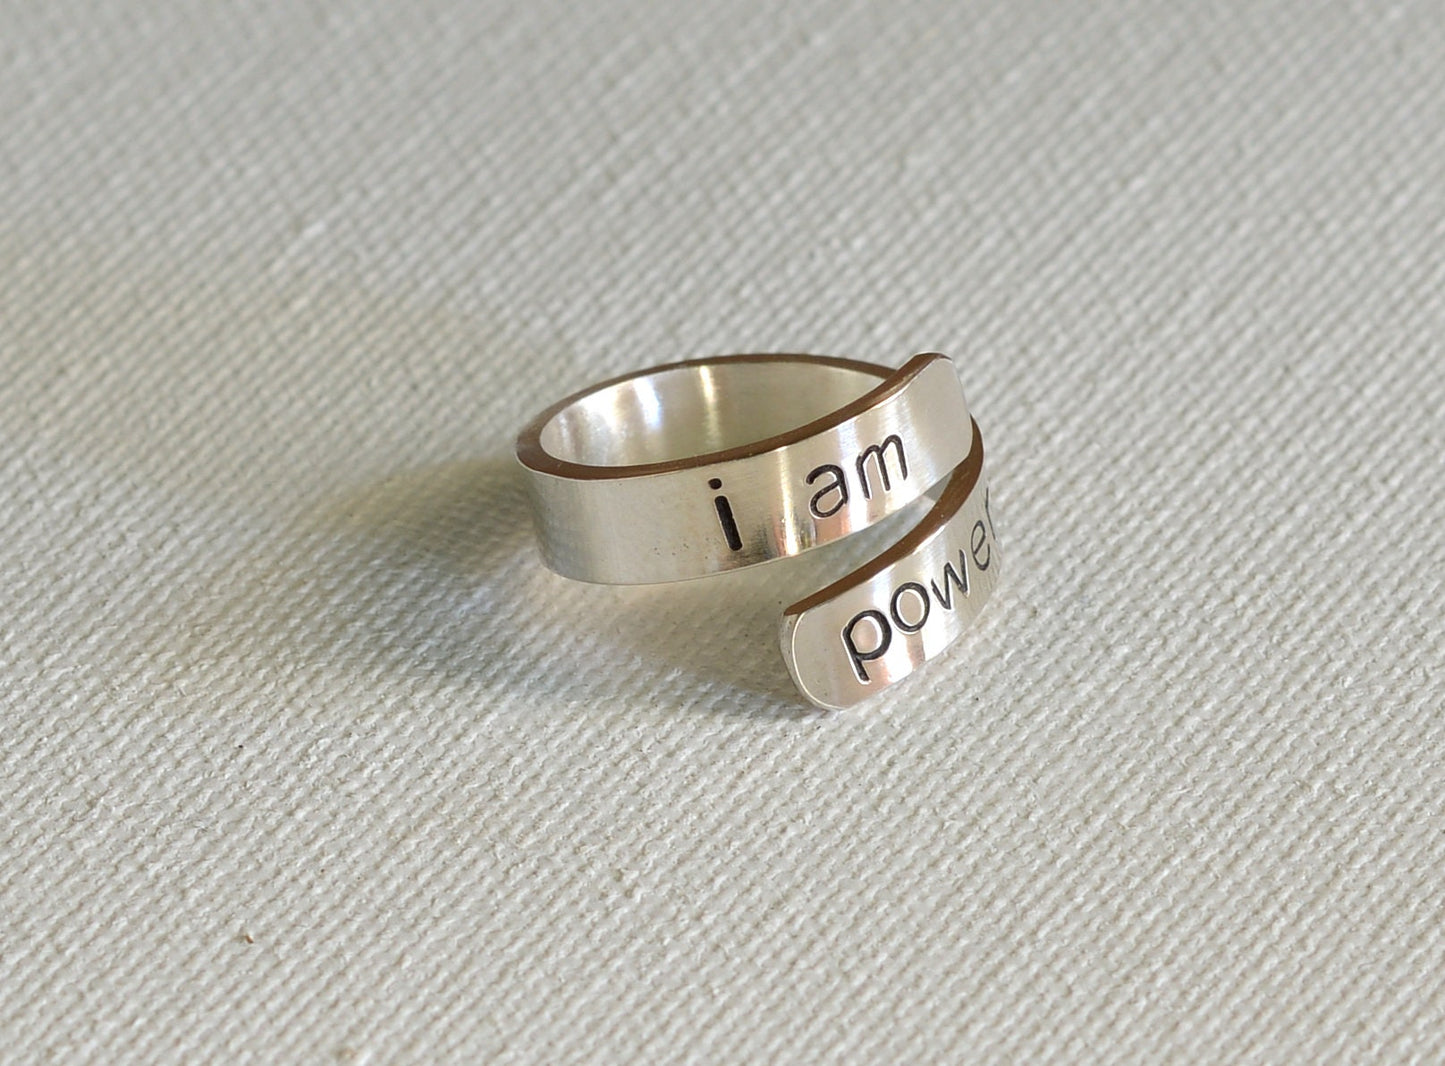 I am Powerful imprinted on a Sterling Silver Wrap Ring for Empowerment